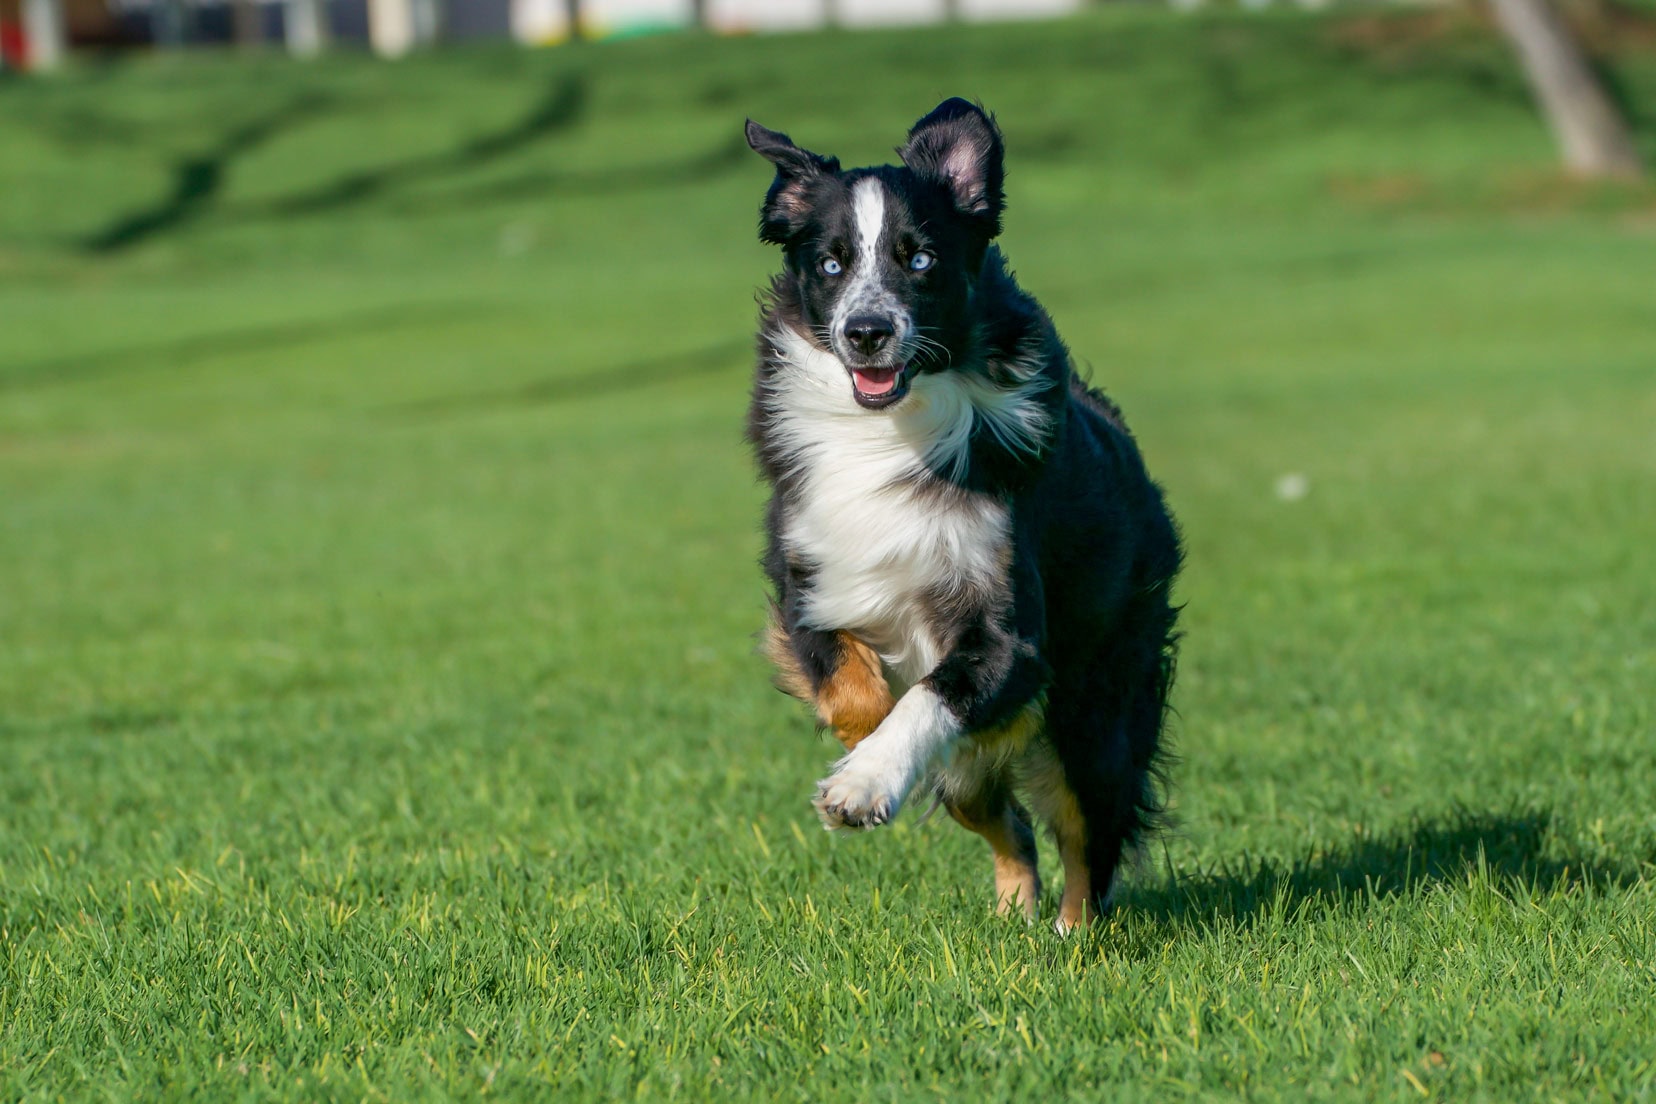 Archie - a mini Austrlaian shepherd - black and white and brown running on a playing field in Perth 